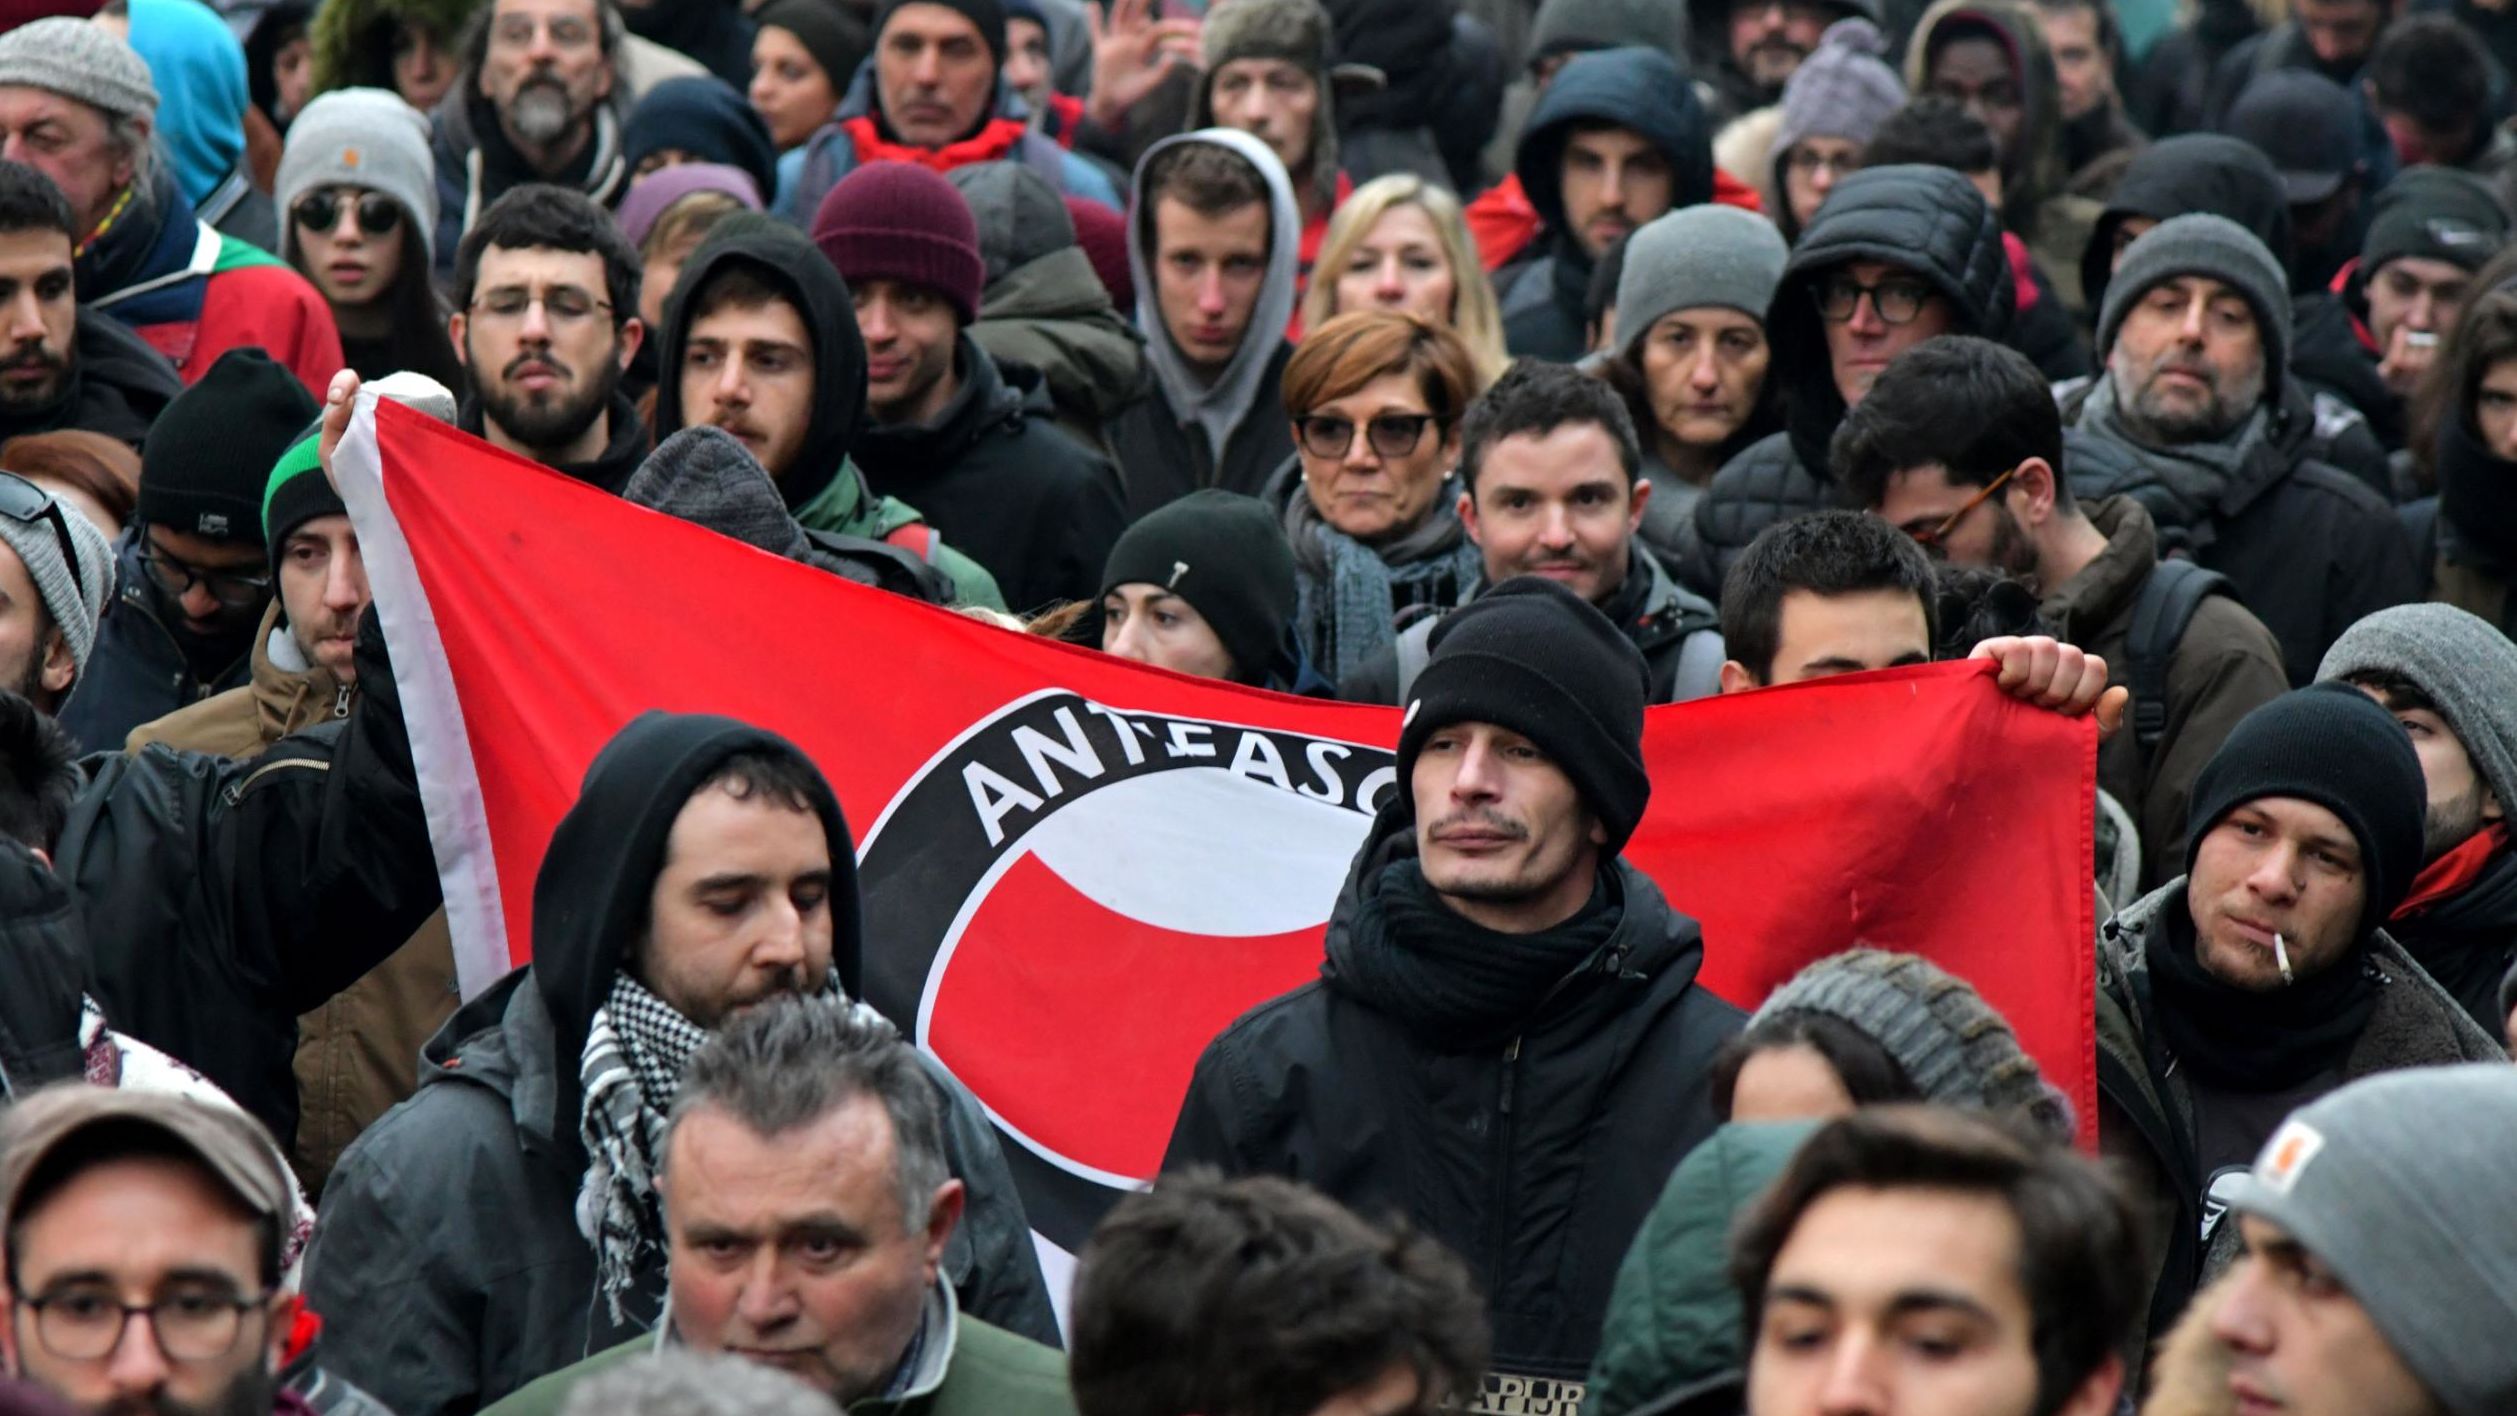 People take part in an anti-racism demonstration Saturday in Macerata, Italy.